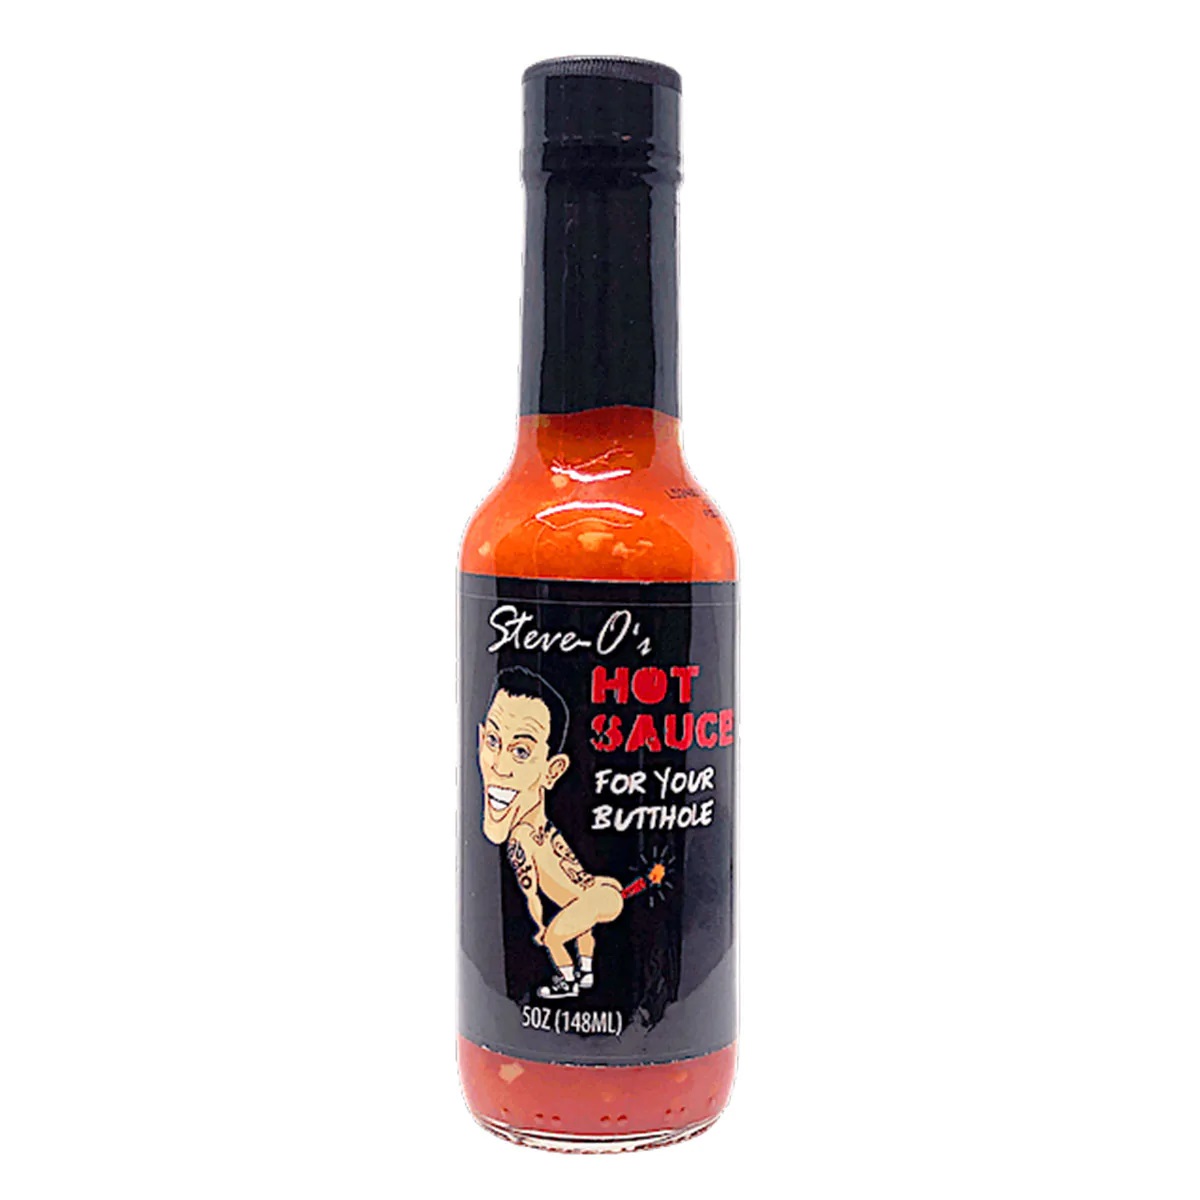 Steve-O's Hotsauce for your Butthole